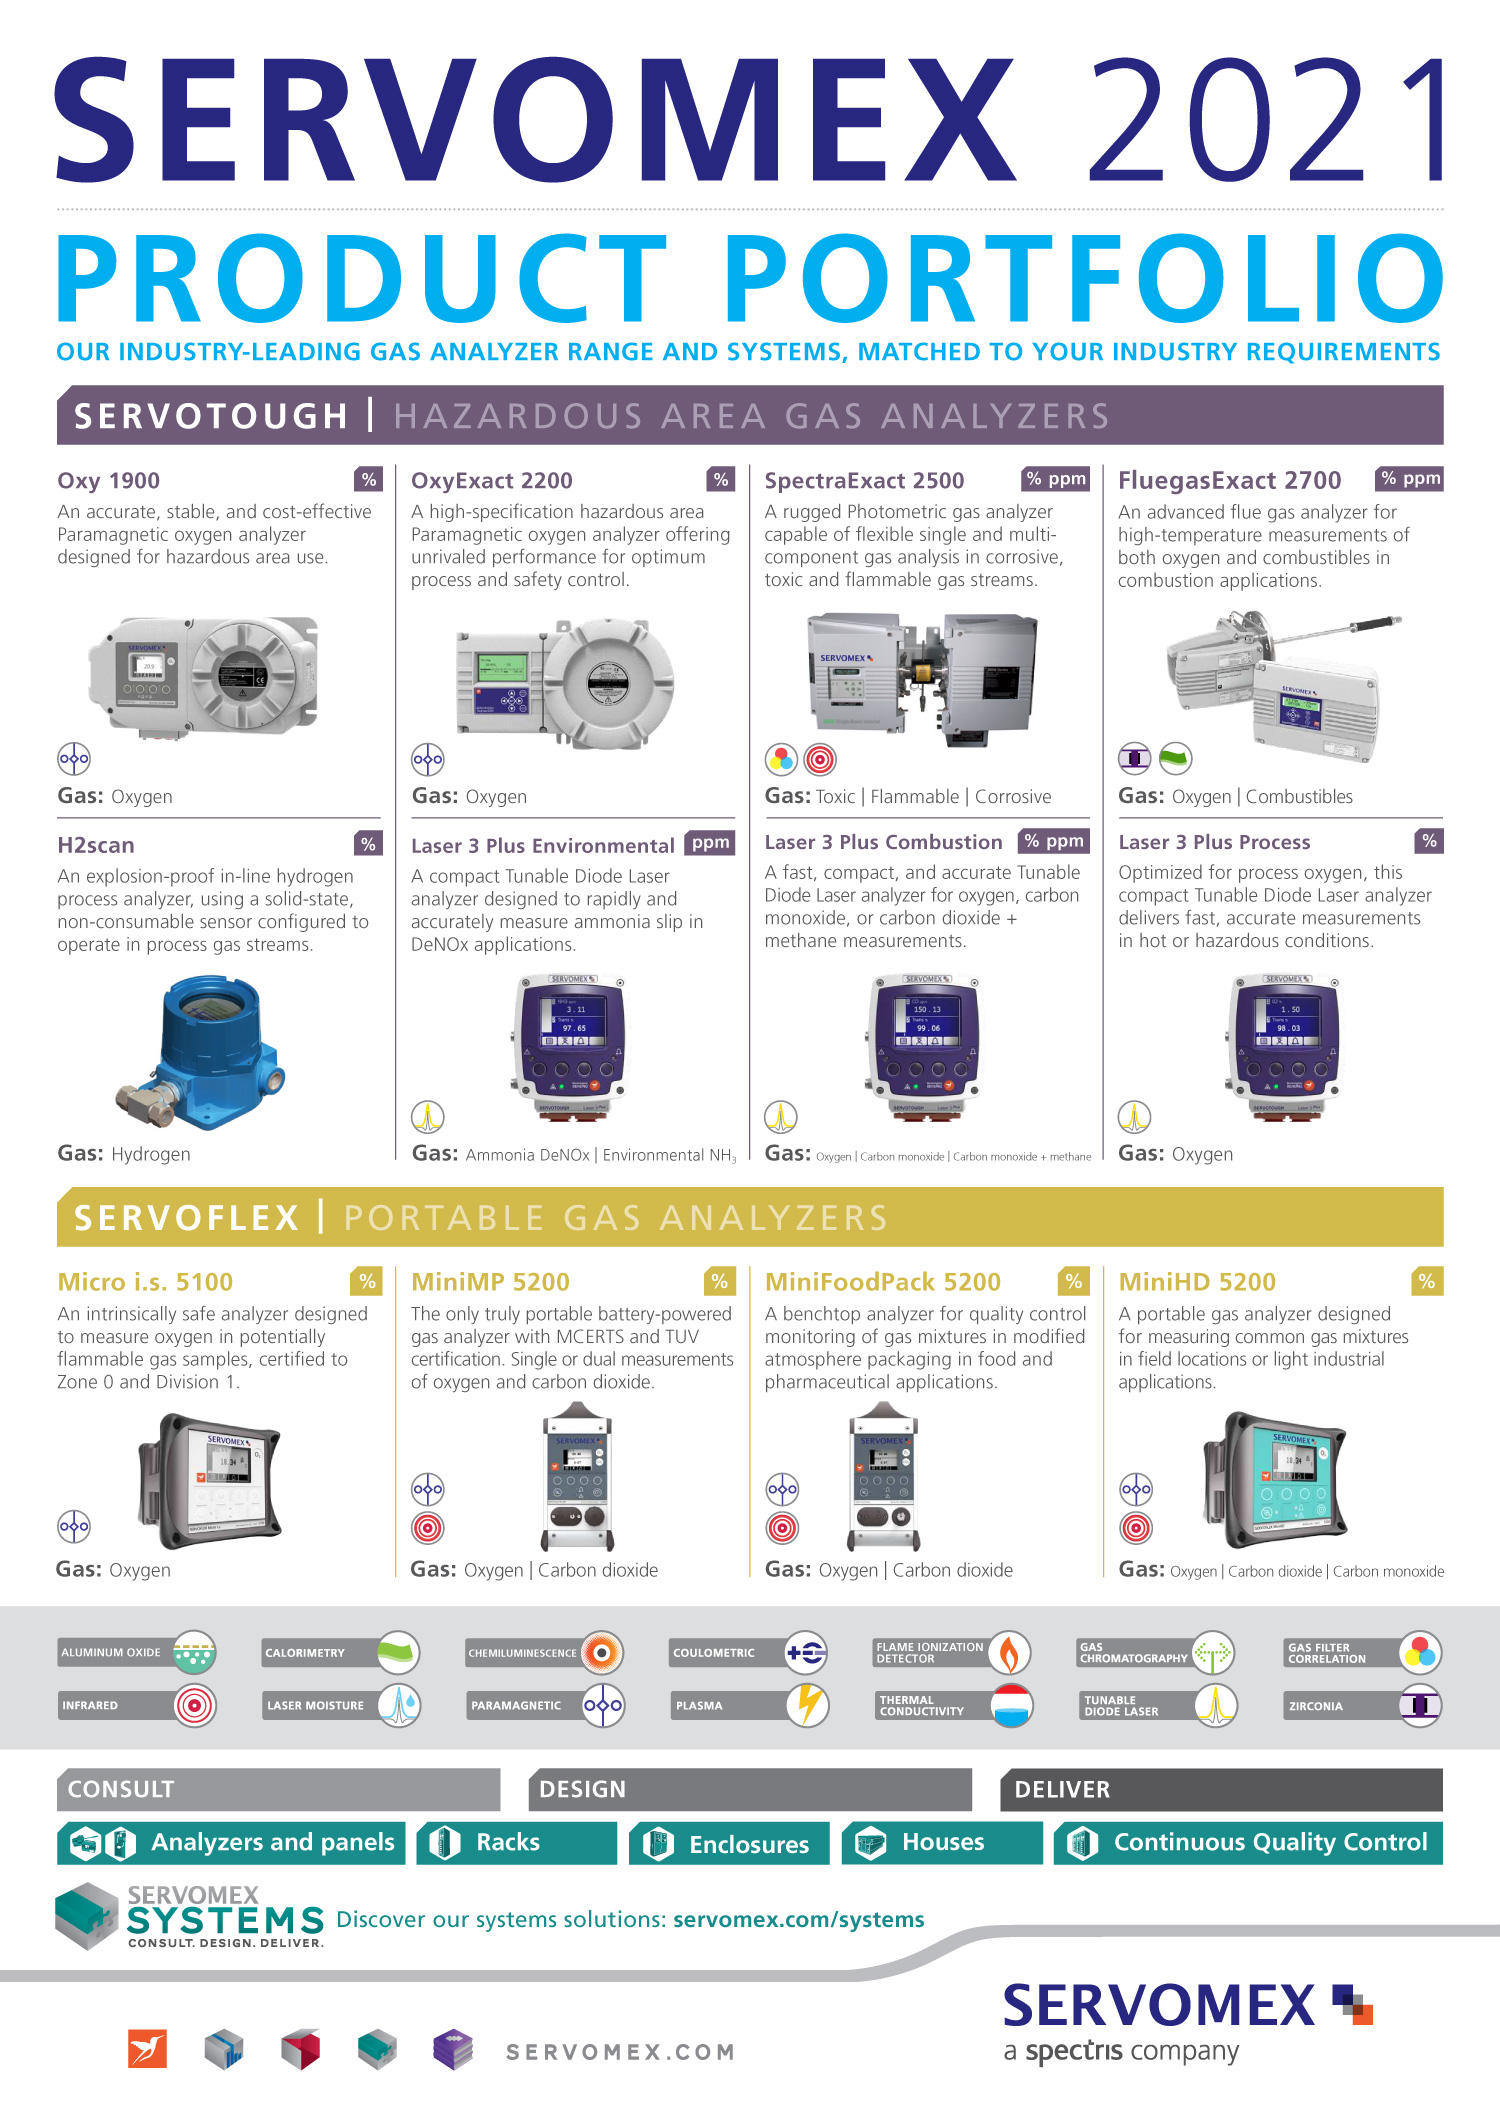 The SERVOMEX introduced a 2-page Product Guide for easy reference covering: SERVOTOUGH Analyzers built to meet the challenges of hot and hazardous environments SERVOFLEX Precision gas sensing technology in a compact, portable design SERVOPRO Reliable, stable and accurate gas measurements for safe area applications.